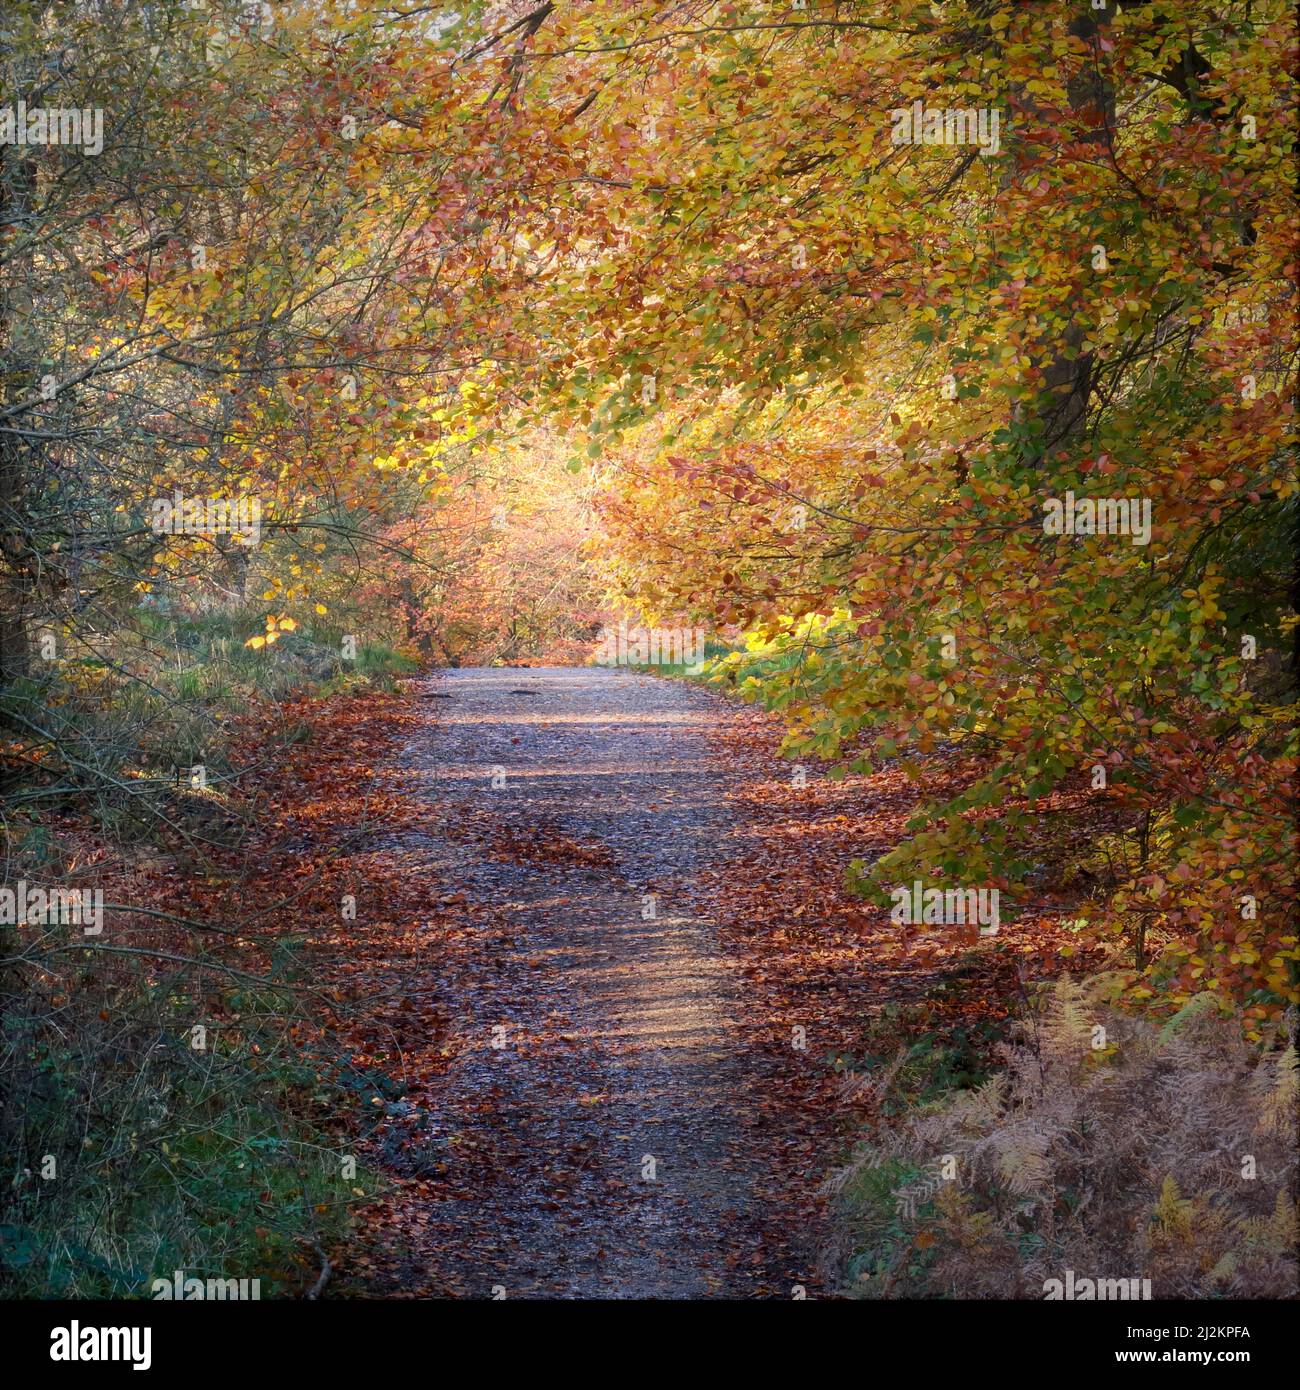 Woodland in autumn with tints and hues from Beech trees lining the Heart of England Way footpath in the Cannock Chase Forest a designated Area of Outs Stock Photo